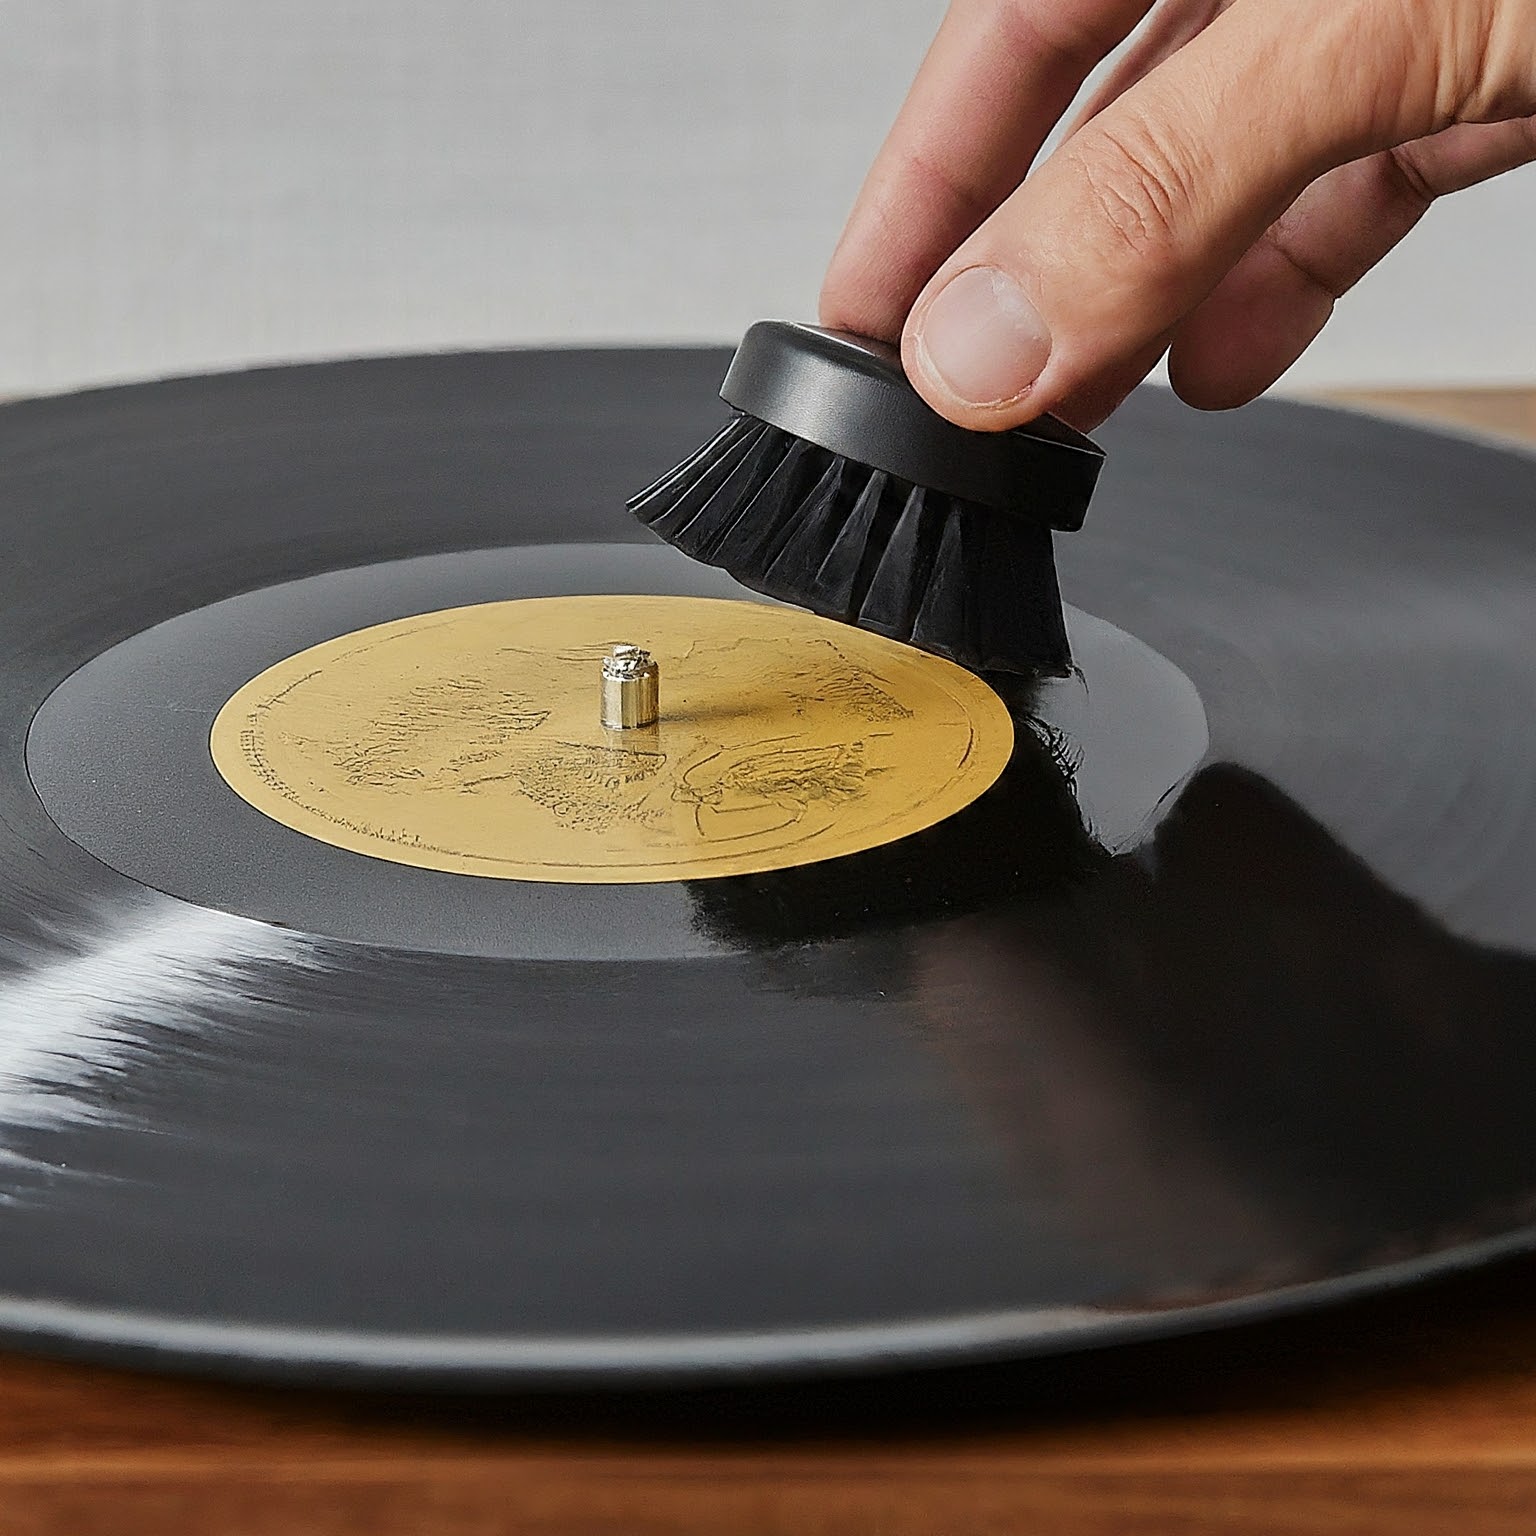 Turntable Kitchen: food, music, and vinyl record club